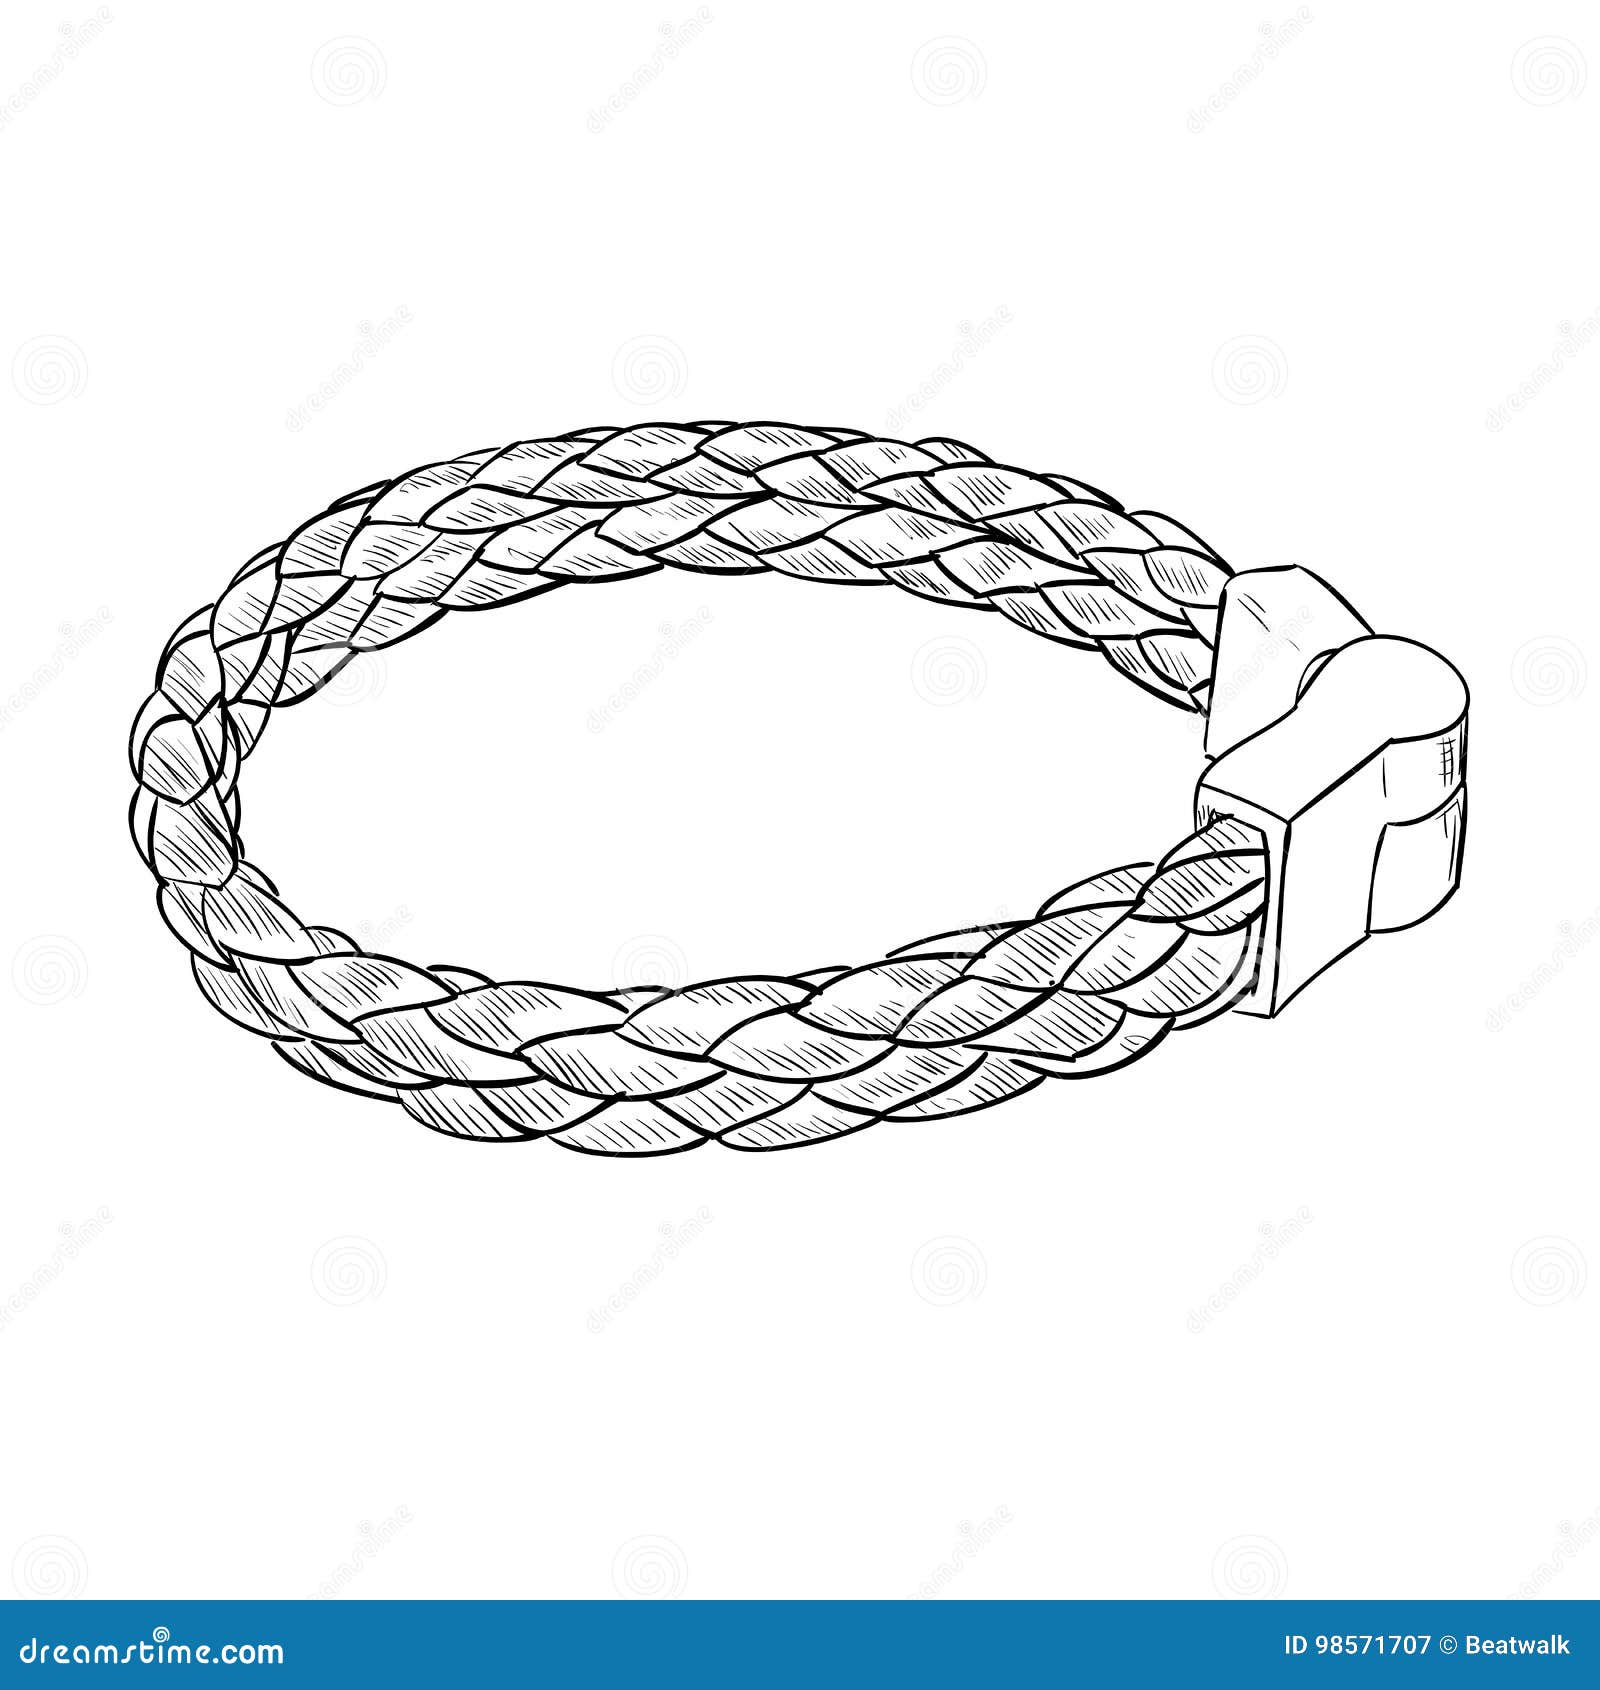 Wristband Illustrations and Clipart 5258 Wristband royalty free  illustrations and drawings available to search from thousands of stock  vector EPS clip art graphic designers